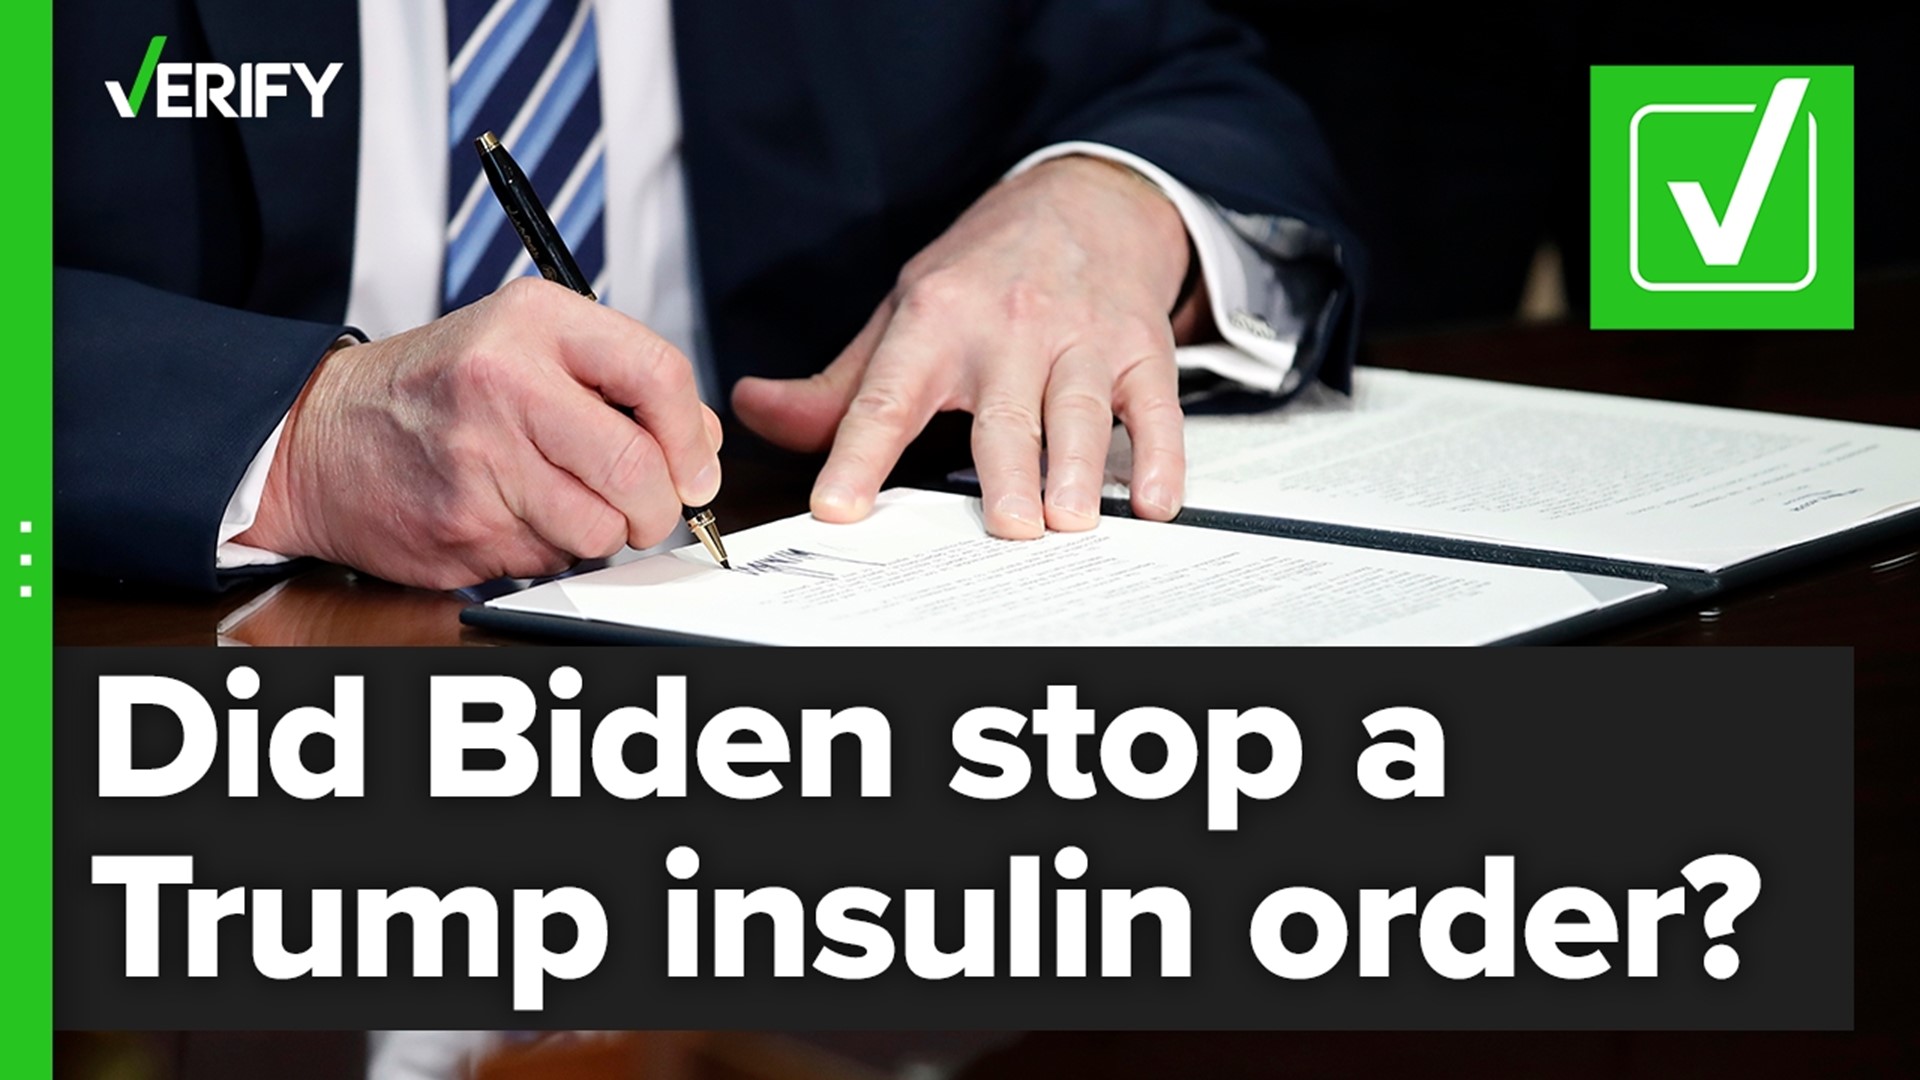 A claim that  Biden stopped a Trump executive order to lower insulin costs is true, but that order would have only helped low-income patients at select clinics.